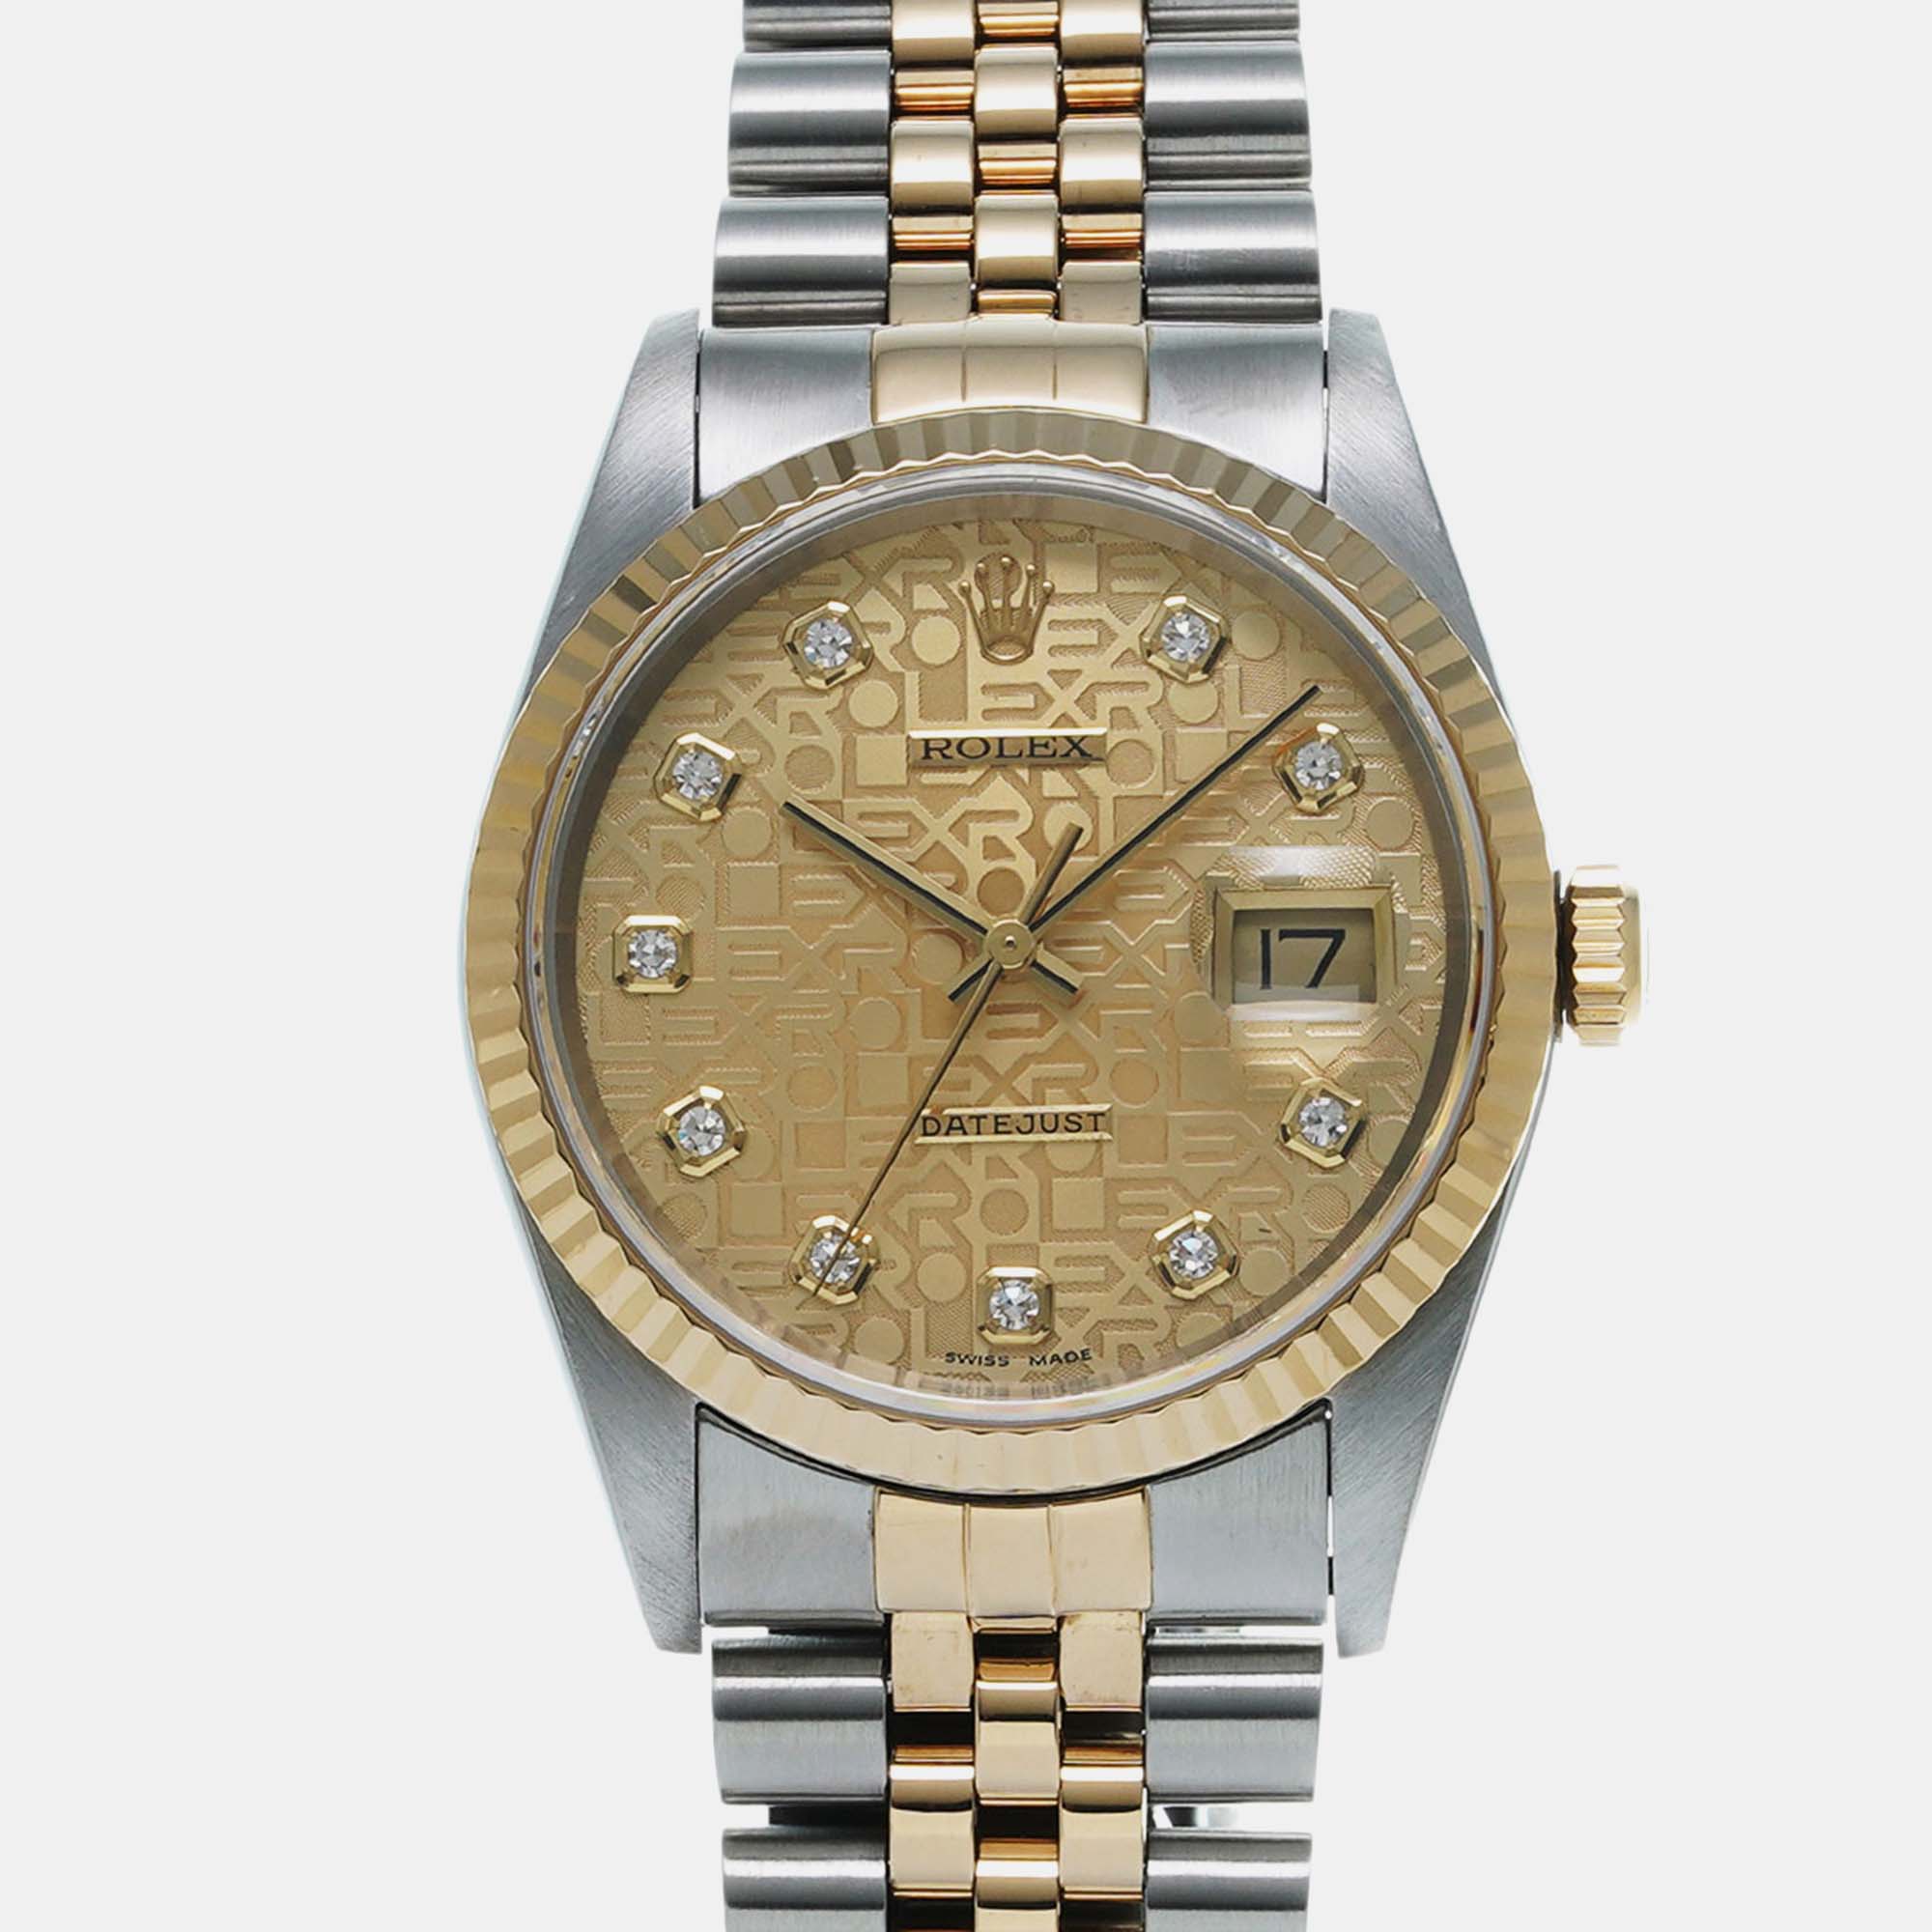 Rolex champagne 18k yellow gold stainless steel diamond datejust 16233 automatic men's wristwatch 36 mm